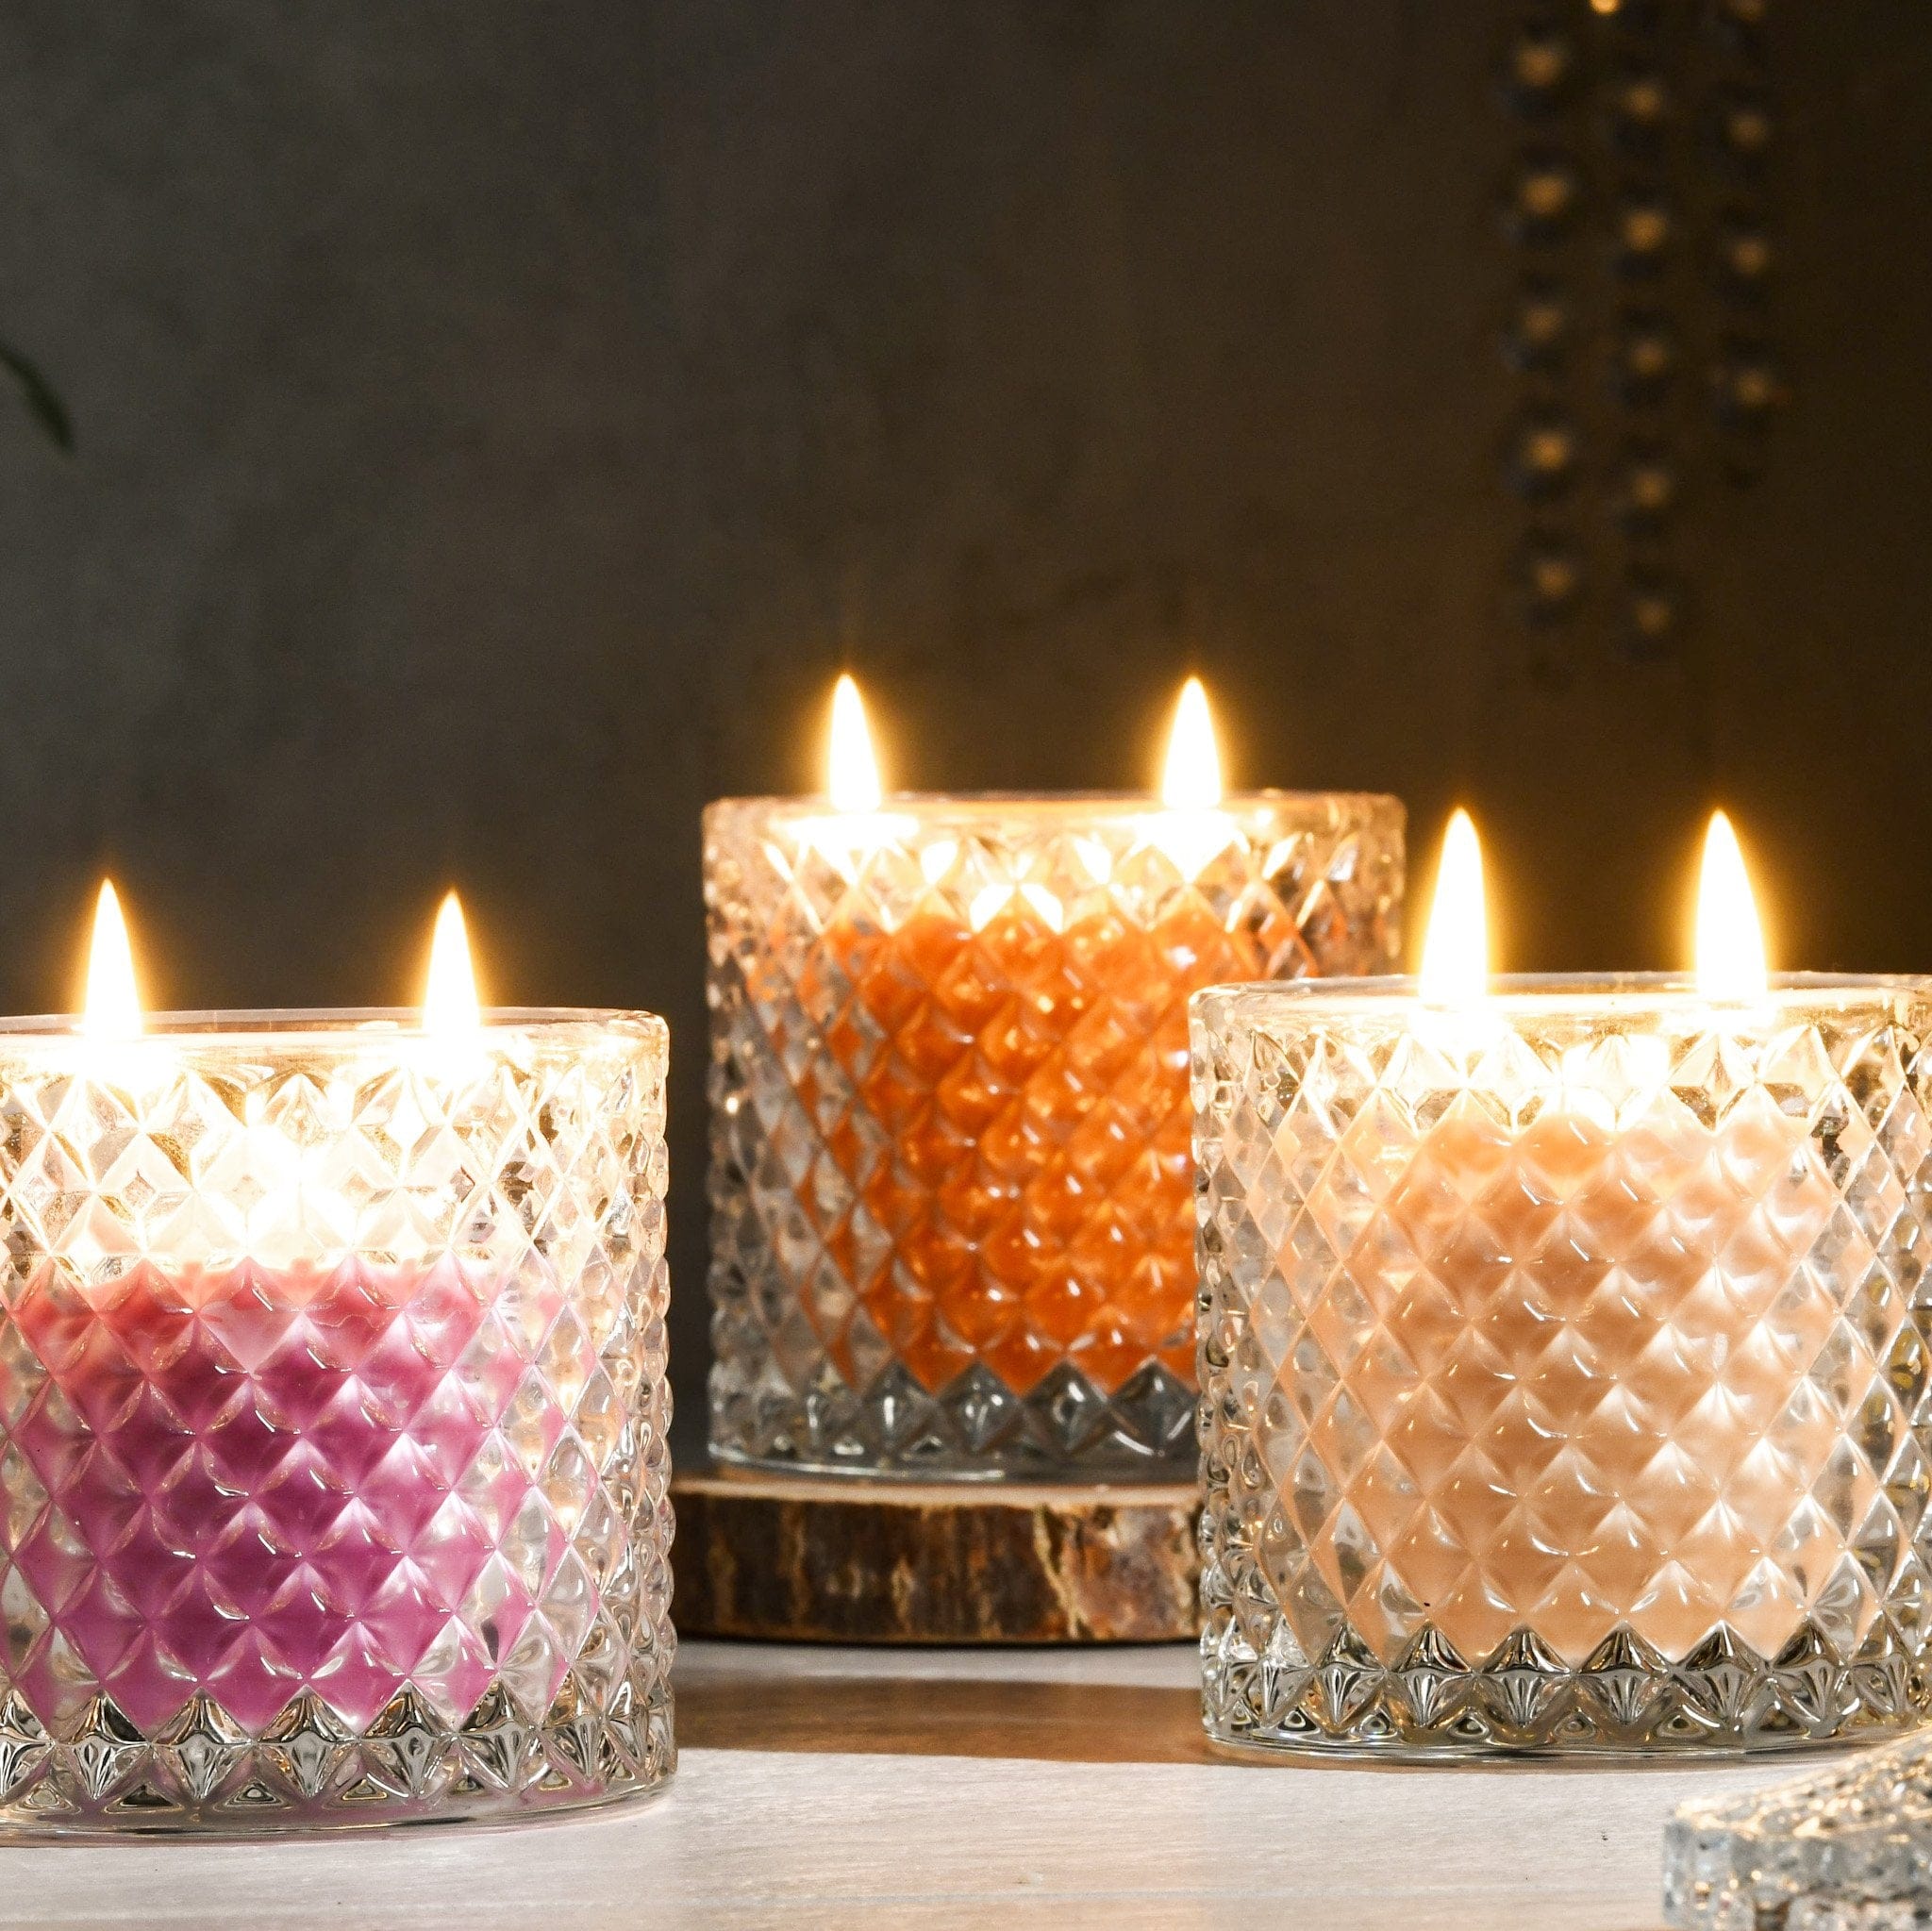 Scented Soy Wax Candle Gift Sets for Diwali Decorations